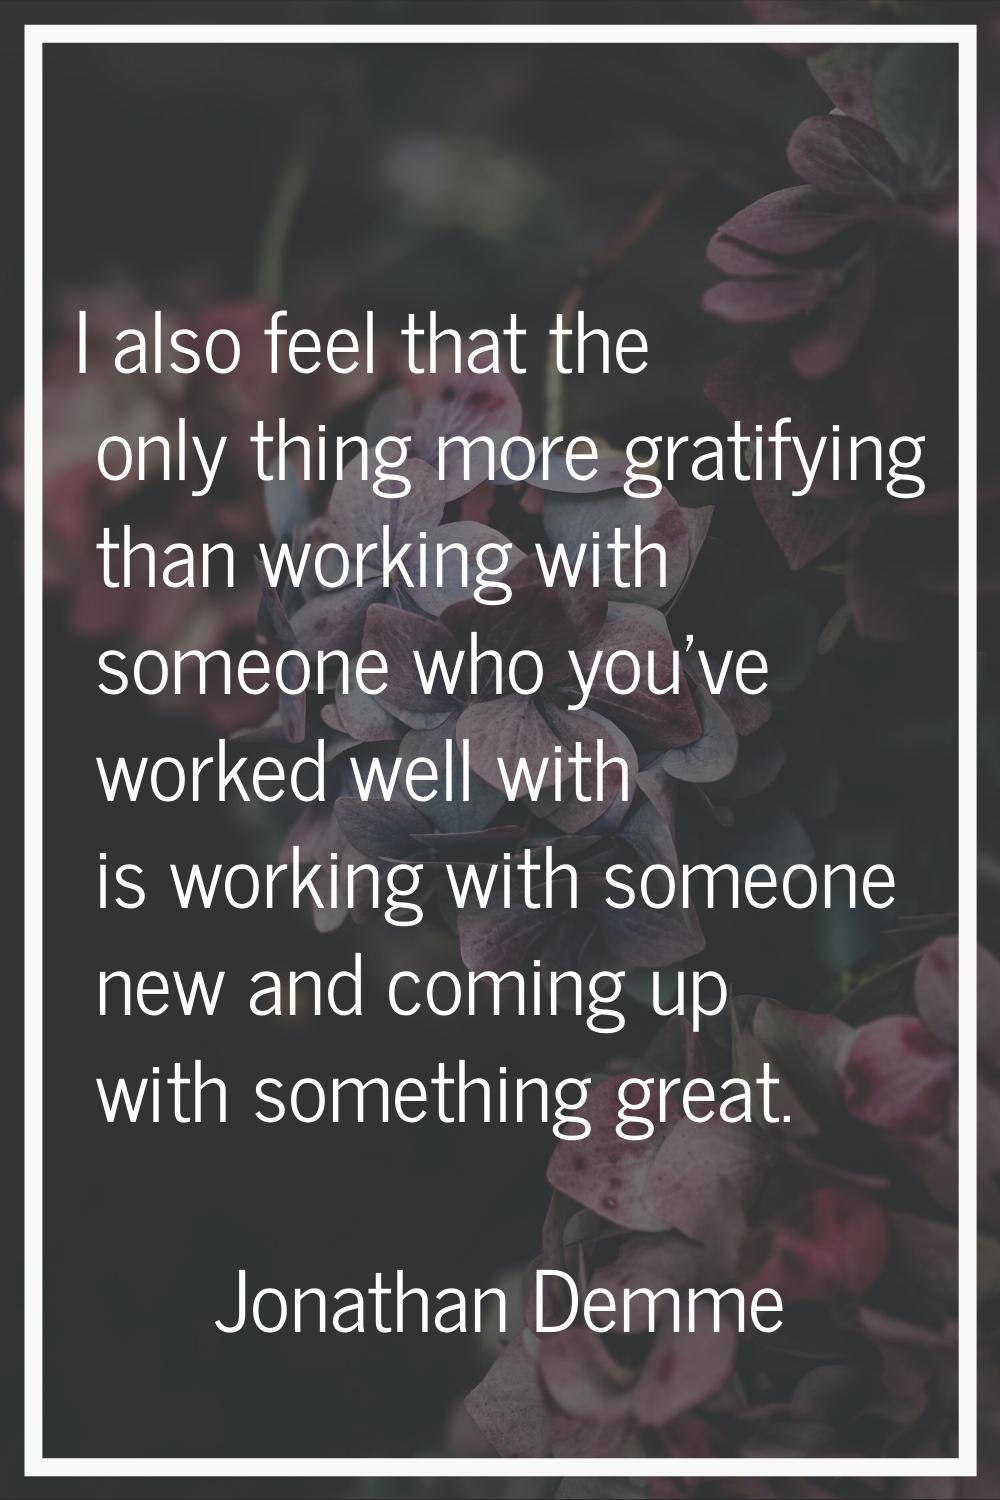 I also feel that the only thing more gratifying than working with someone who you've worked well wi